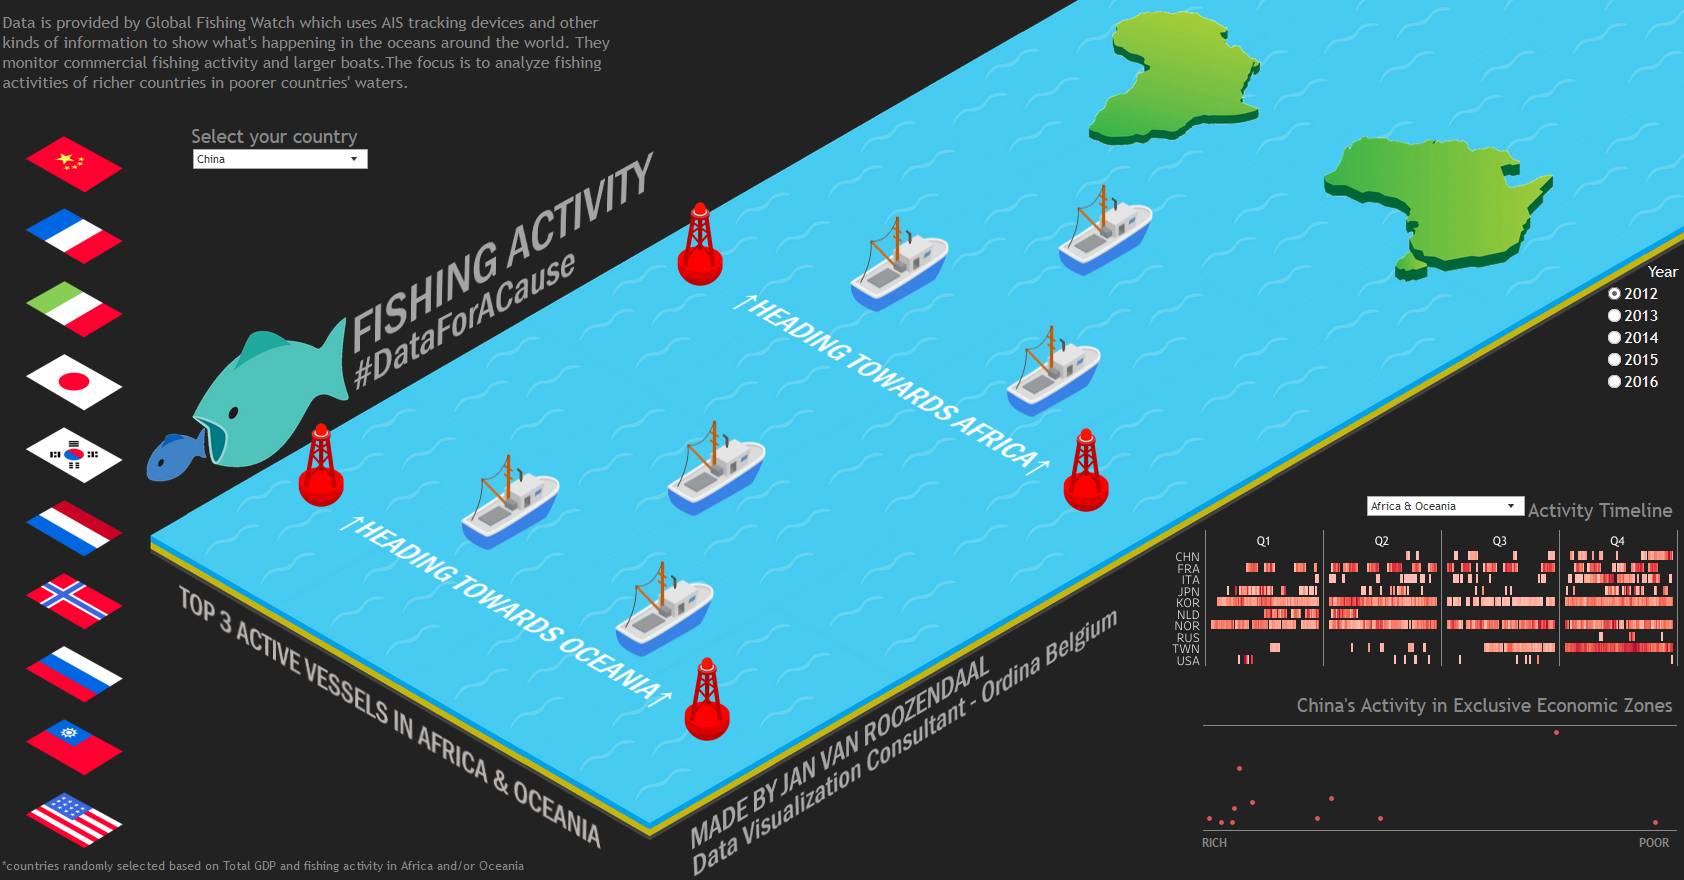 Thumbnail of a Tableau Dashboard - Fishing Activity